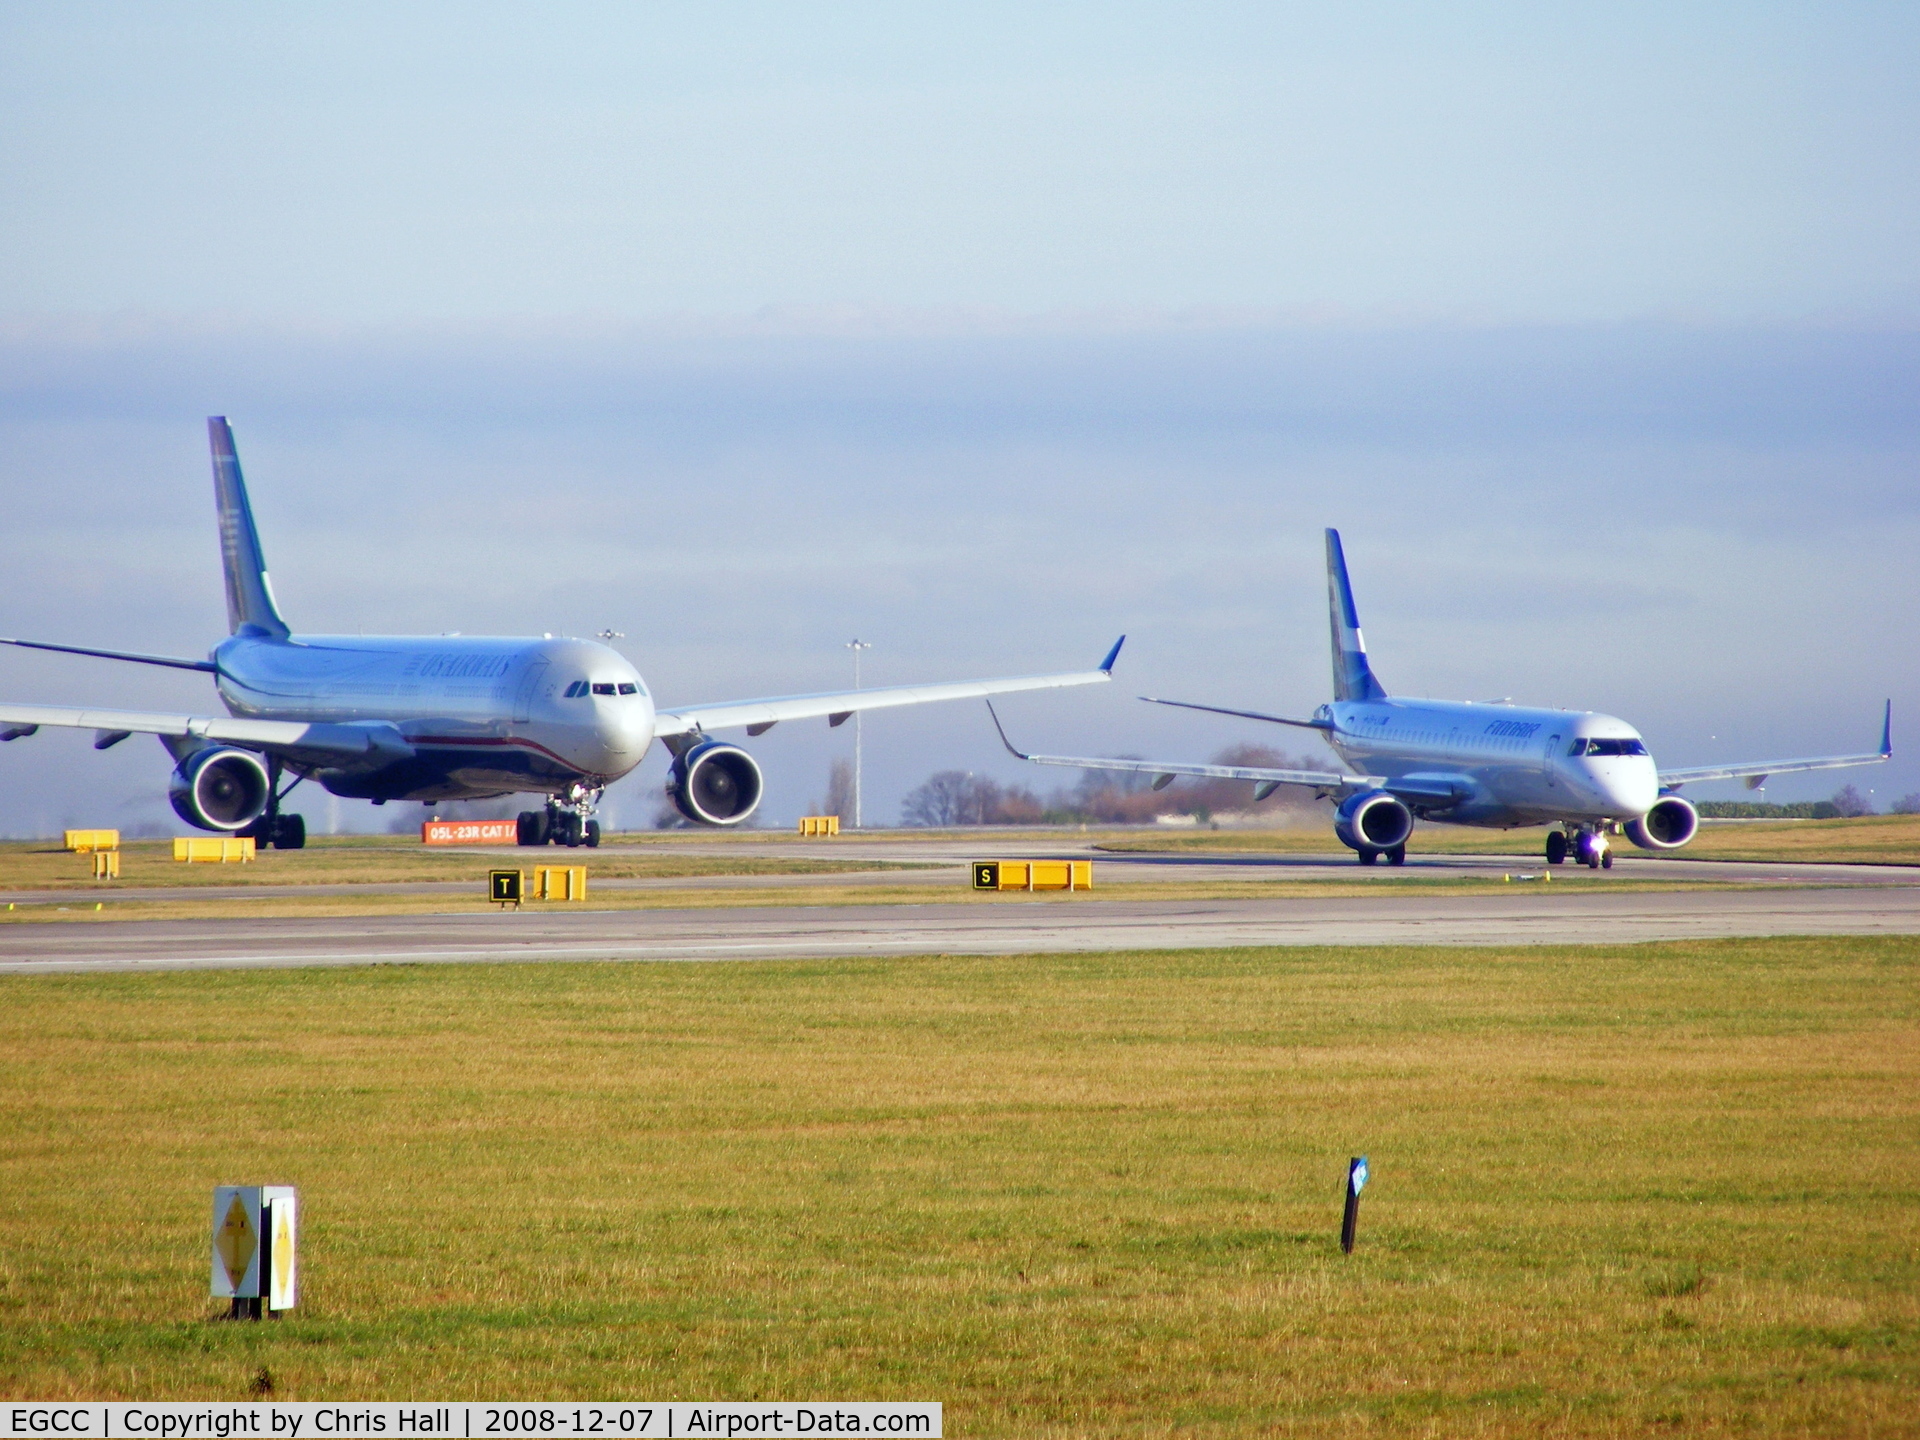 Manchester Airport, Manchester, England United Kingdom (EGCC) - N271AY and OH-OKG